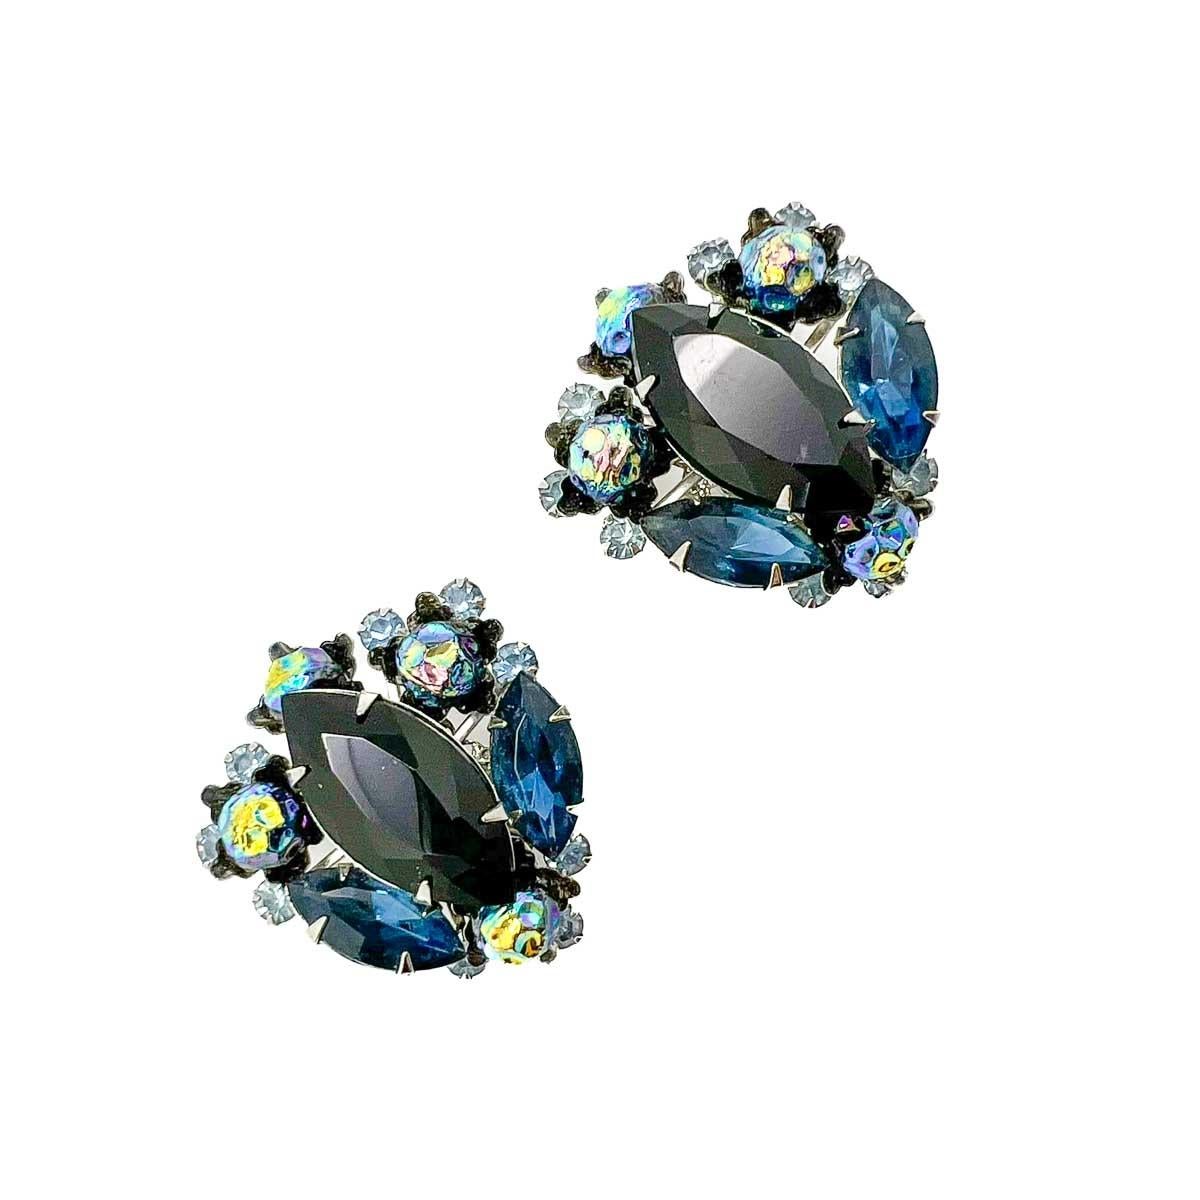 A pair of Vintage Judy Lea Navette  Earrings. A large black navette stone is surrounded with a remarkable myriad of fancy stones and beads all in black to navy hues. A rare and forever stylish find with incredible detail and craftmanship.

Founded